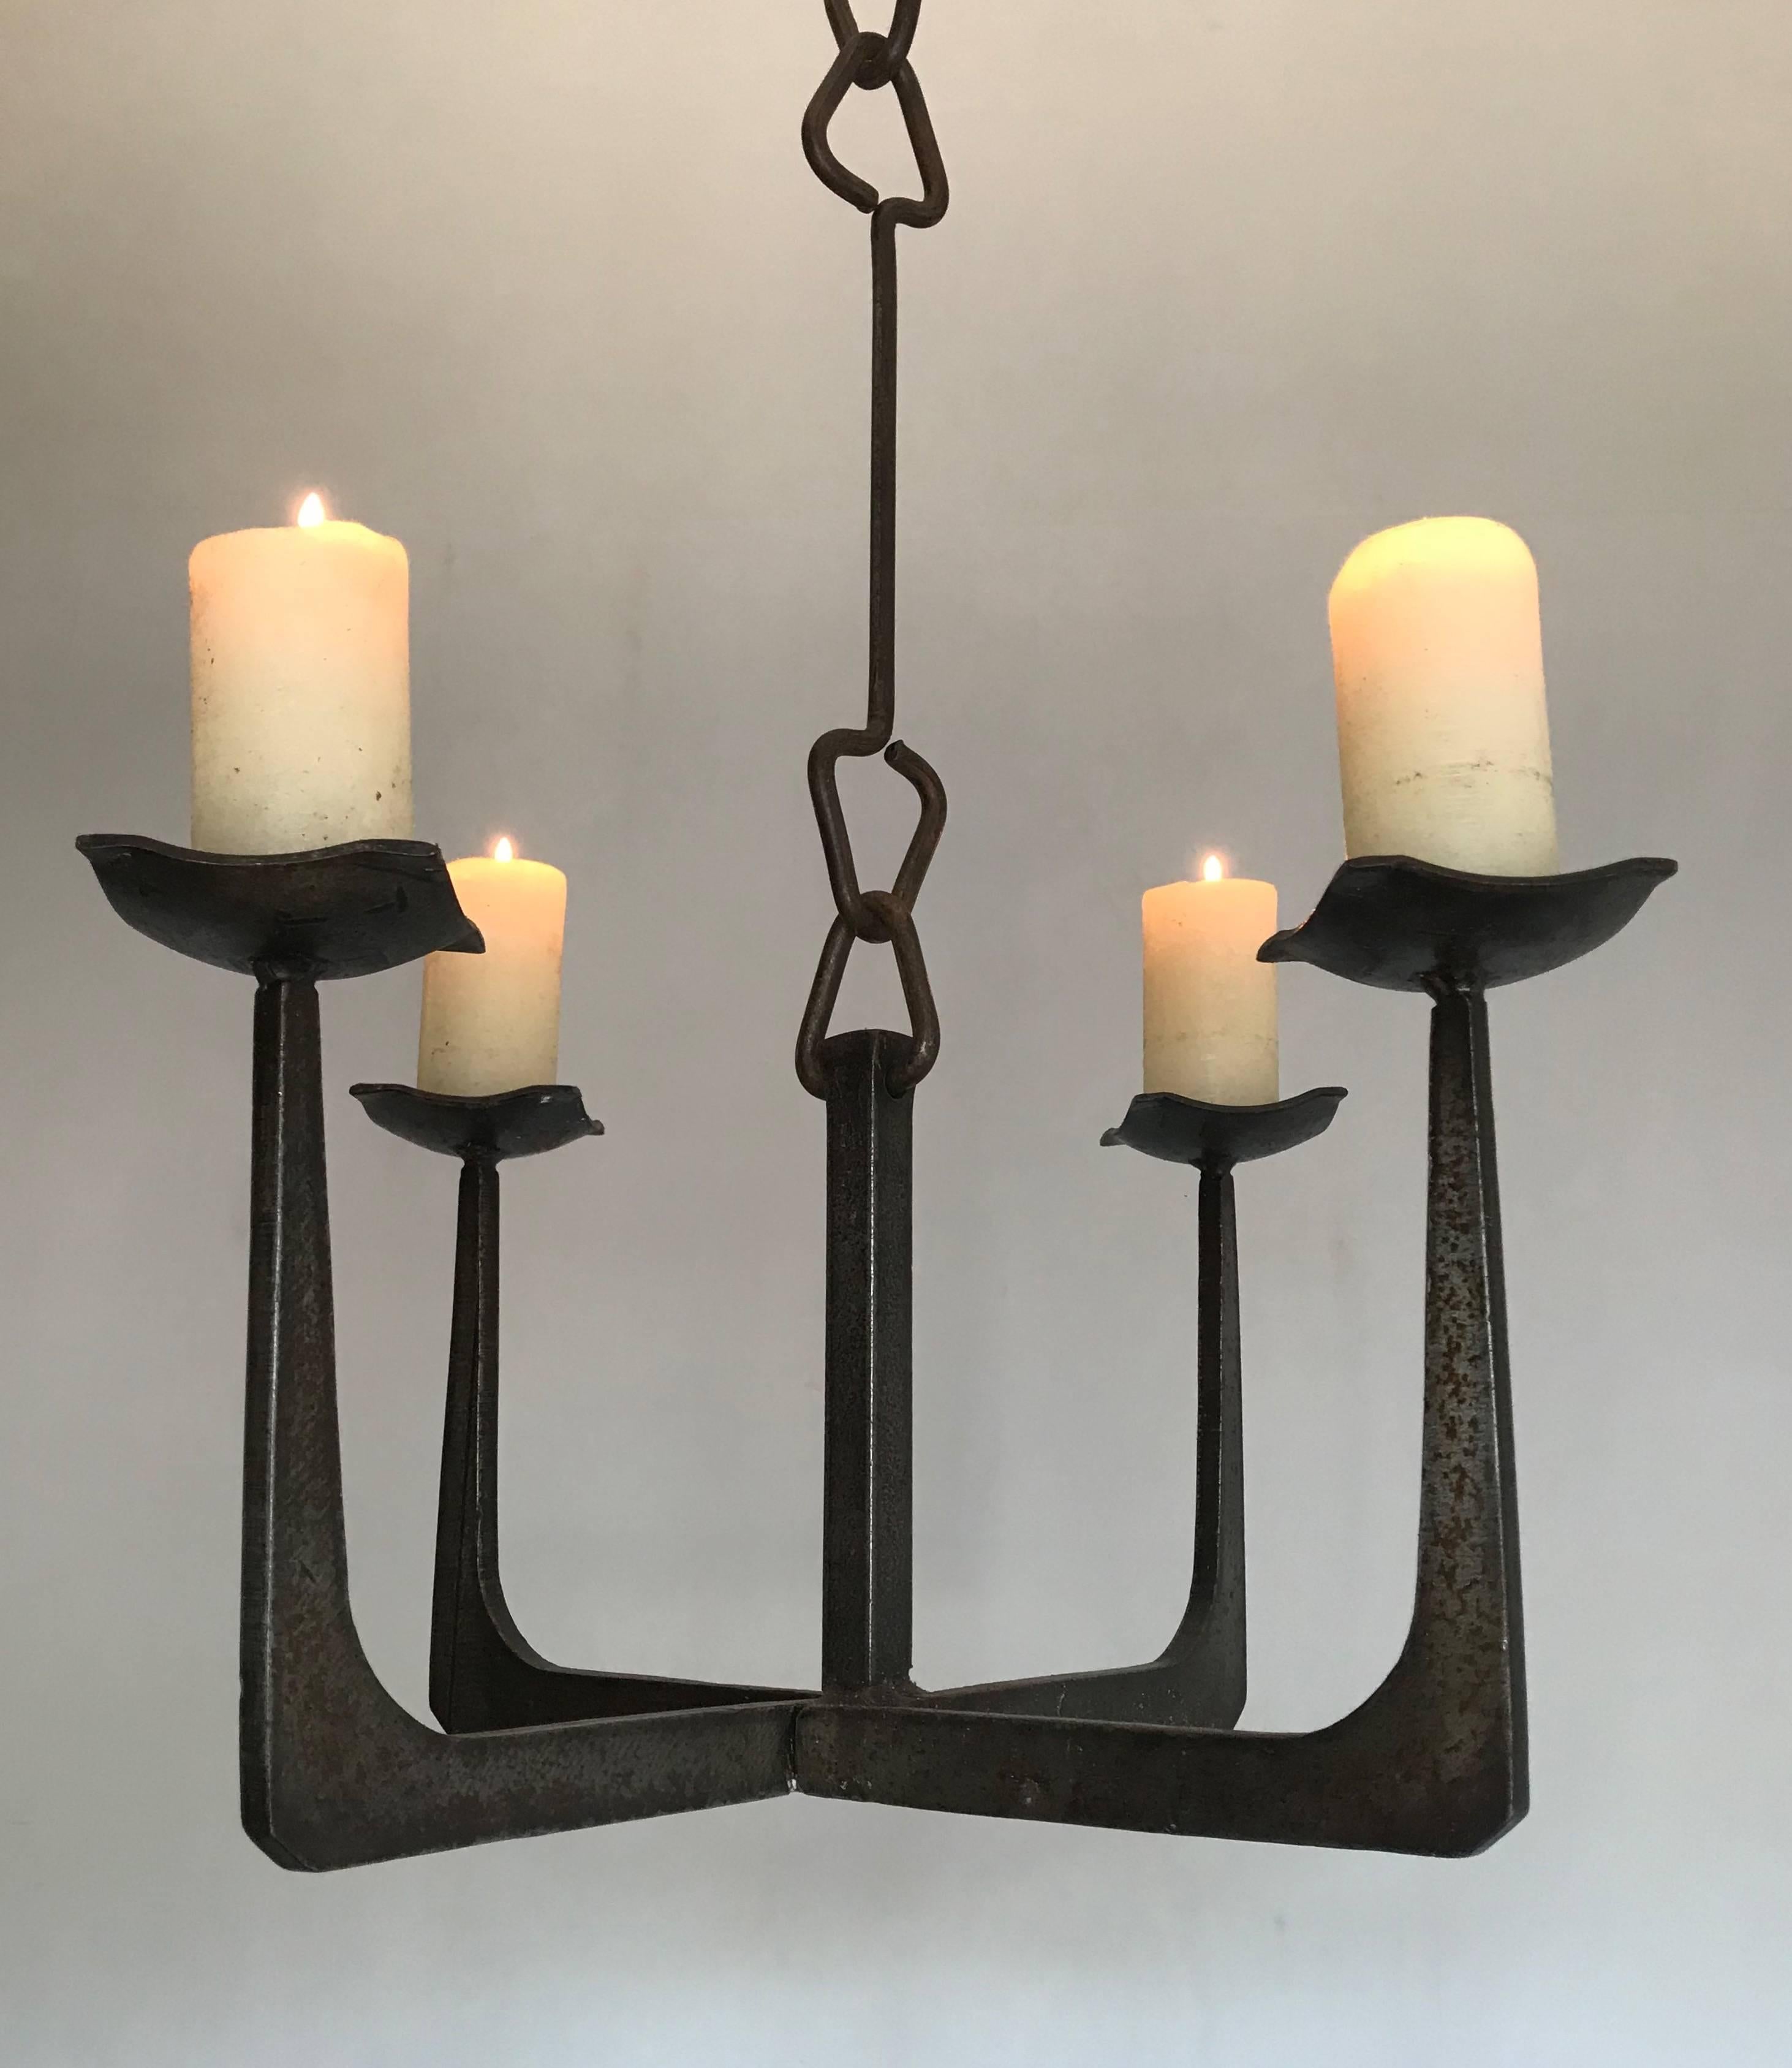 Brutalist all-handcrafted and angular design candle pendant light.

This sleek & timeless candle chandelier of practical size could be the perfect lighting solution to a space that needs a special atmosphere. The angular design will make this